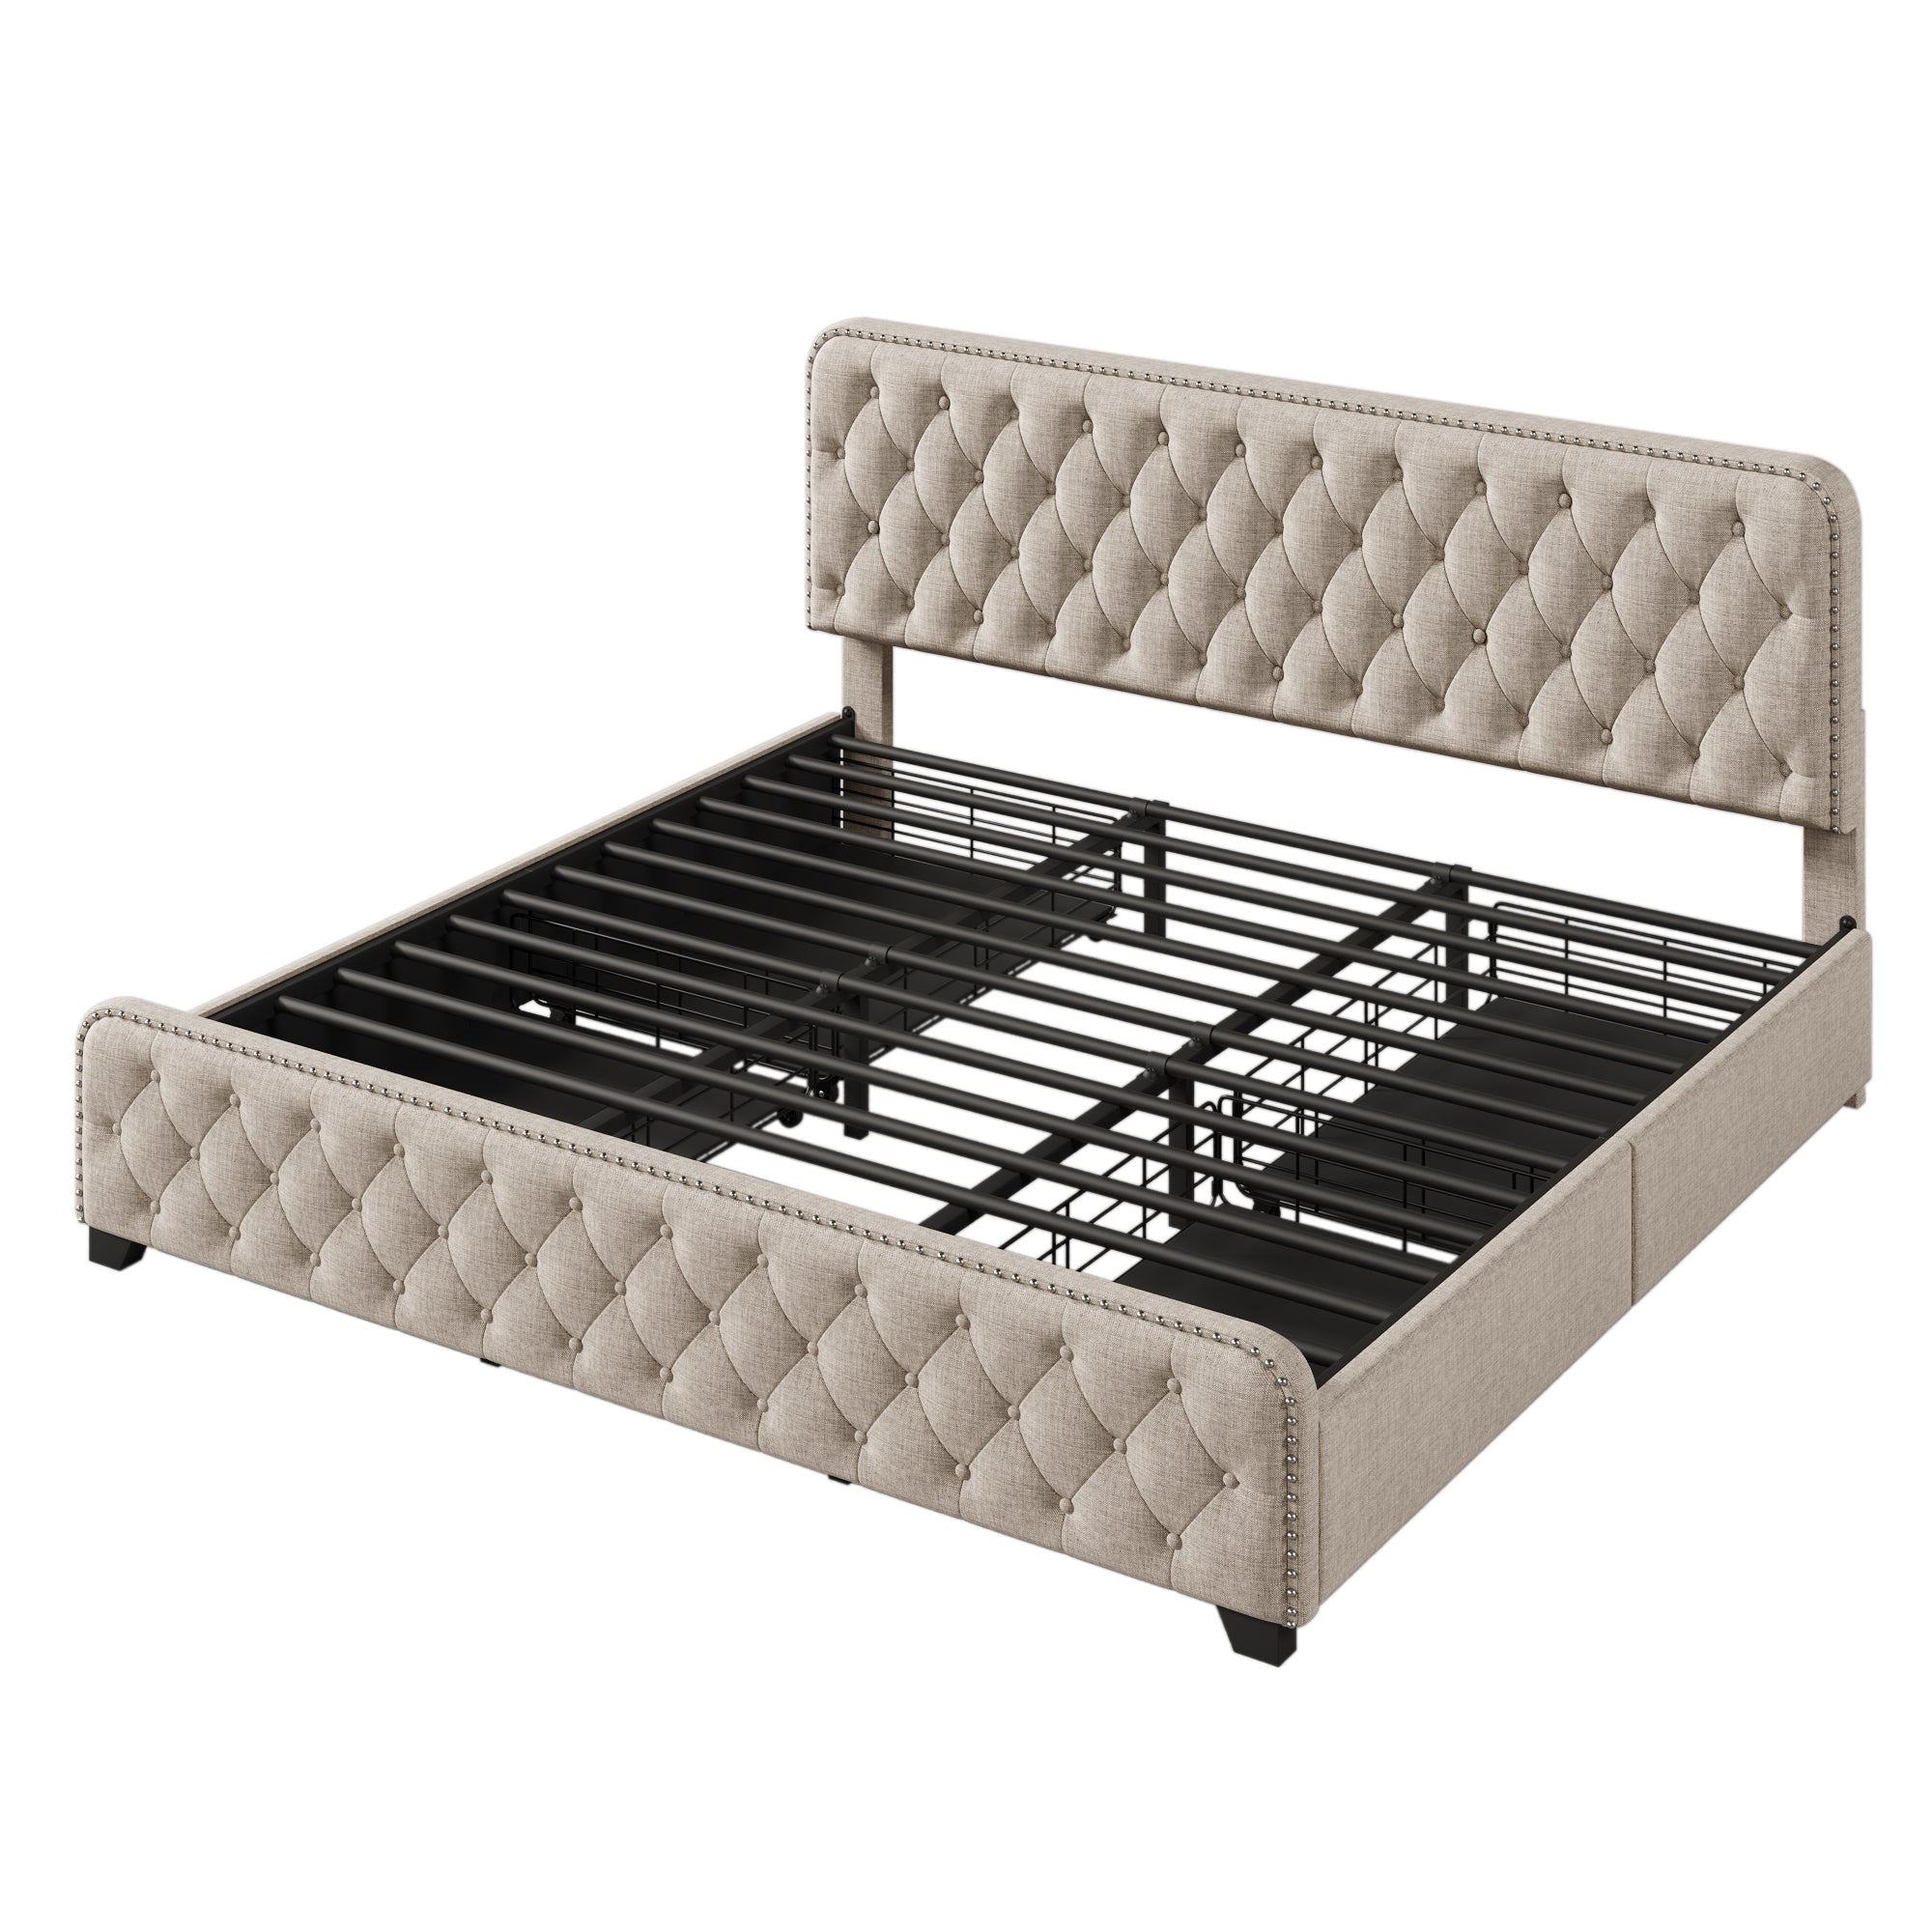 Upholstered Platform Bed with 4 Drawers, Button Tufted Headboard and Footboard Sturdy Metal Support